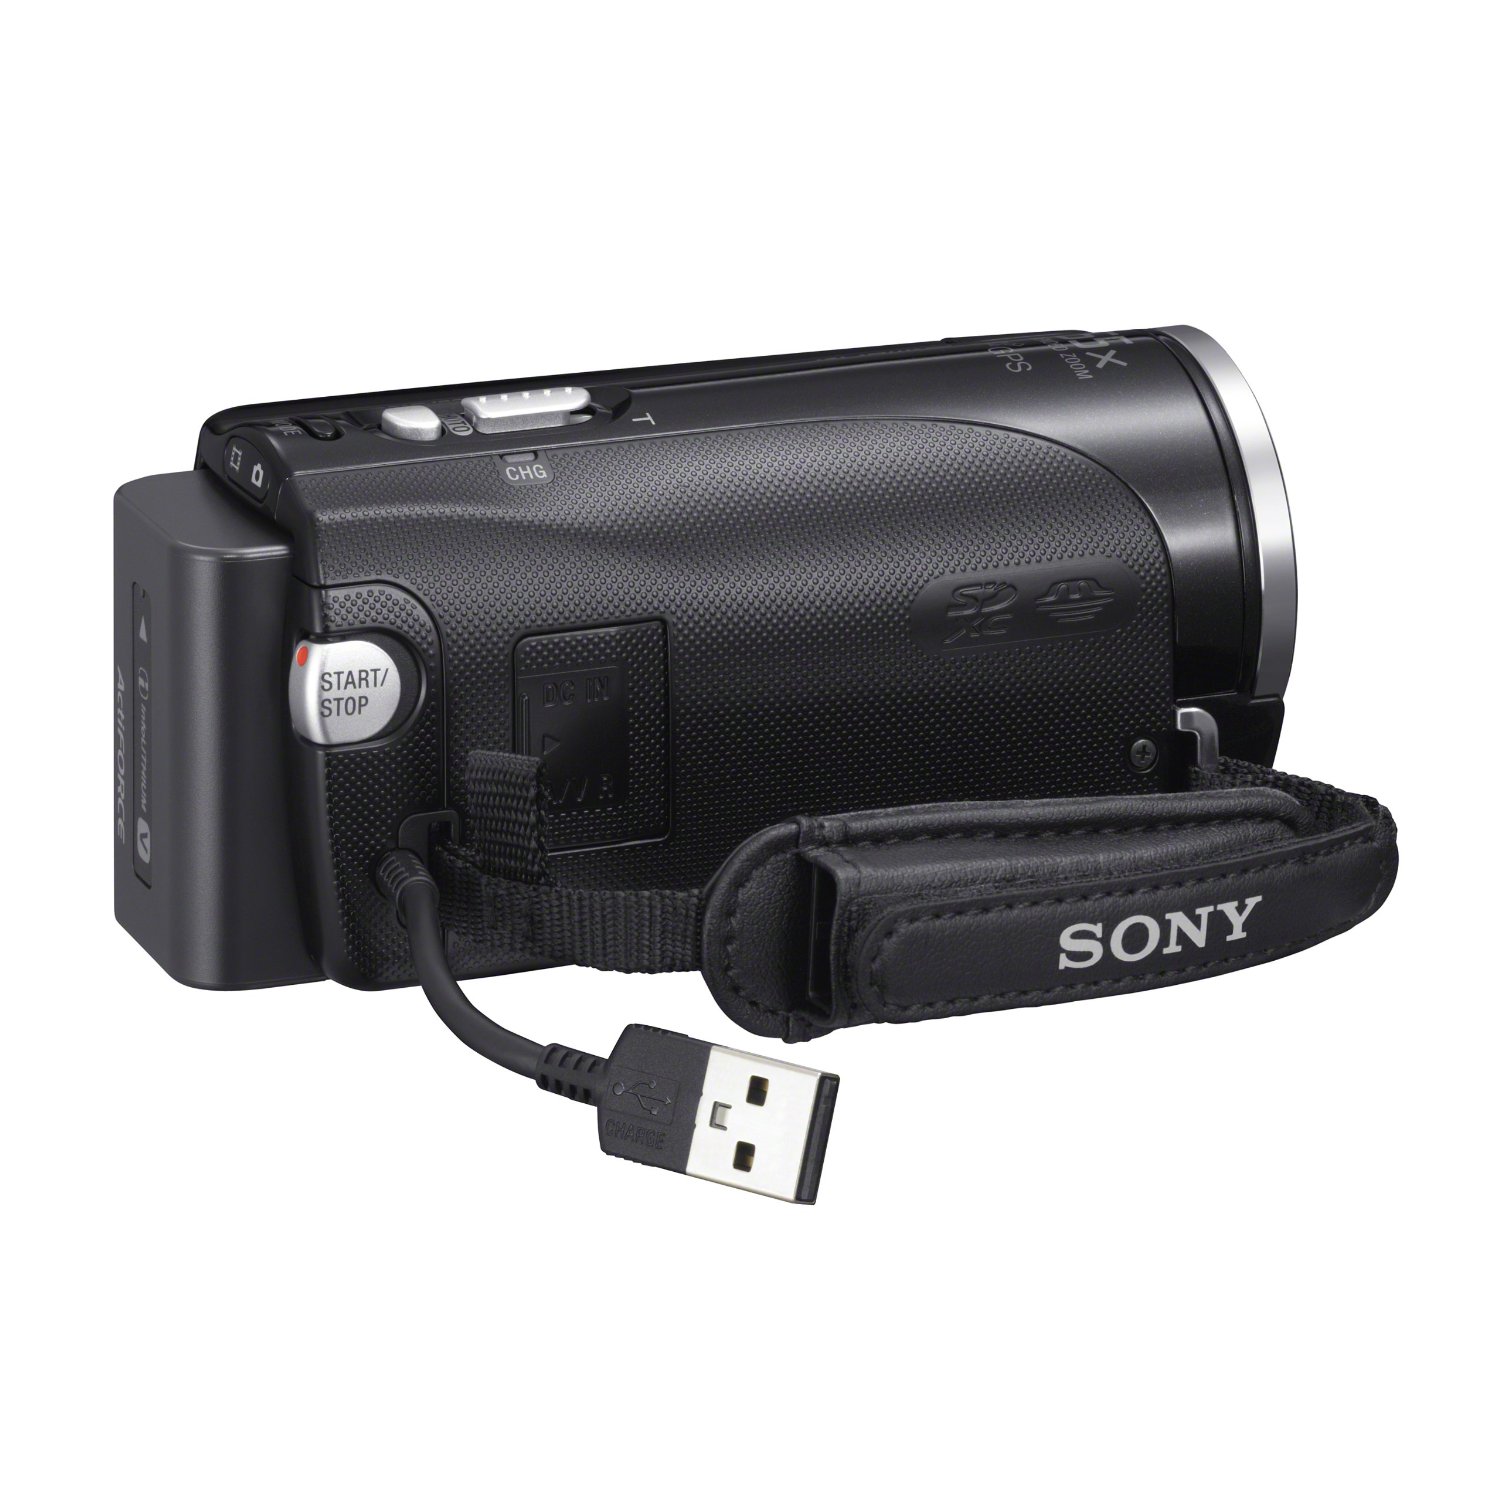 http://thetechjournal.com/wp-content/uploads/images/1205/1336441634-sonys-hdrcx260v-89-mp-camcorder-with-30x-optical-zoom-7.jpg